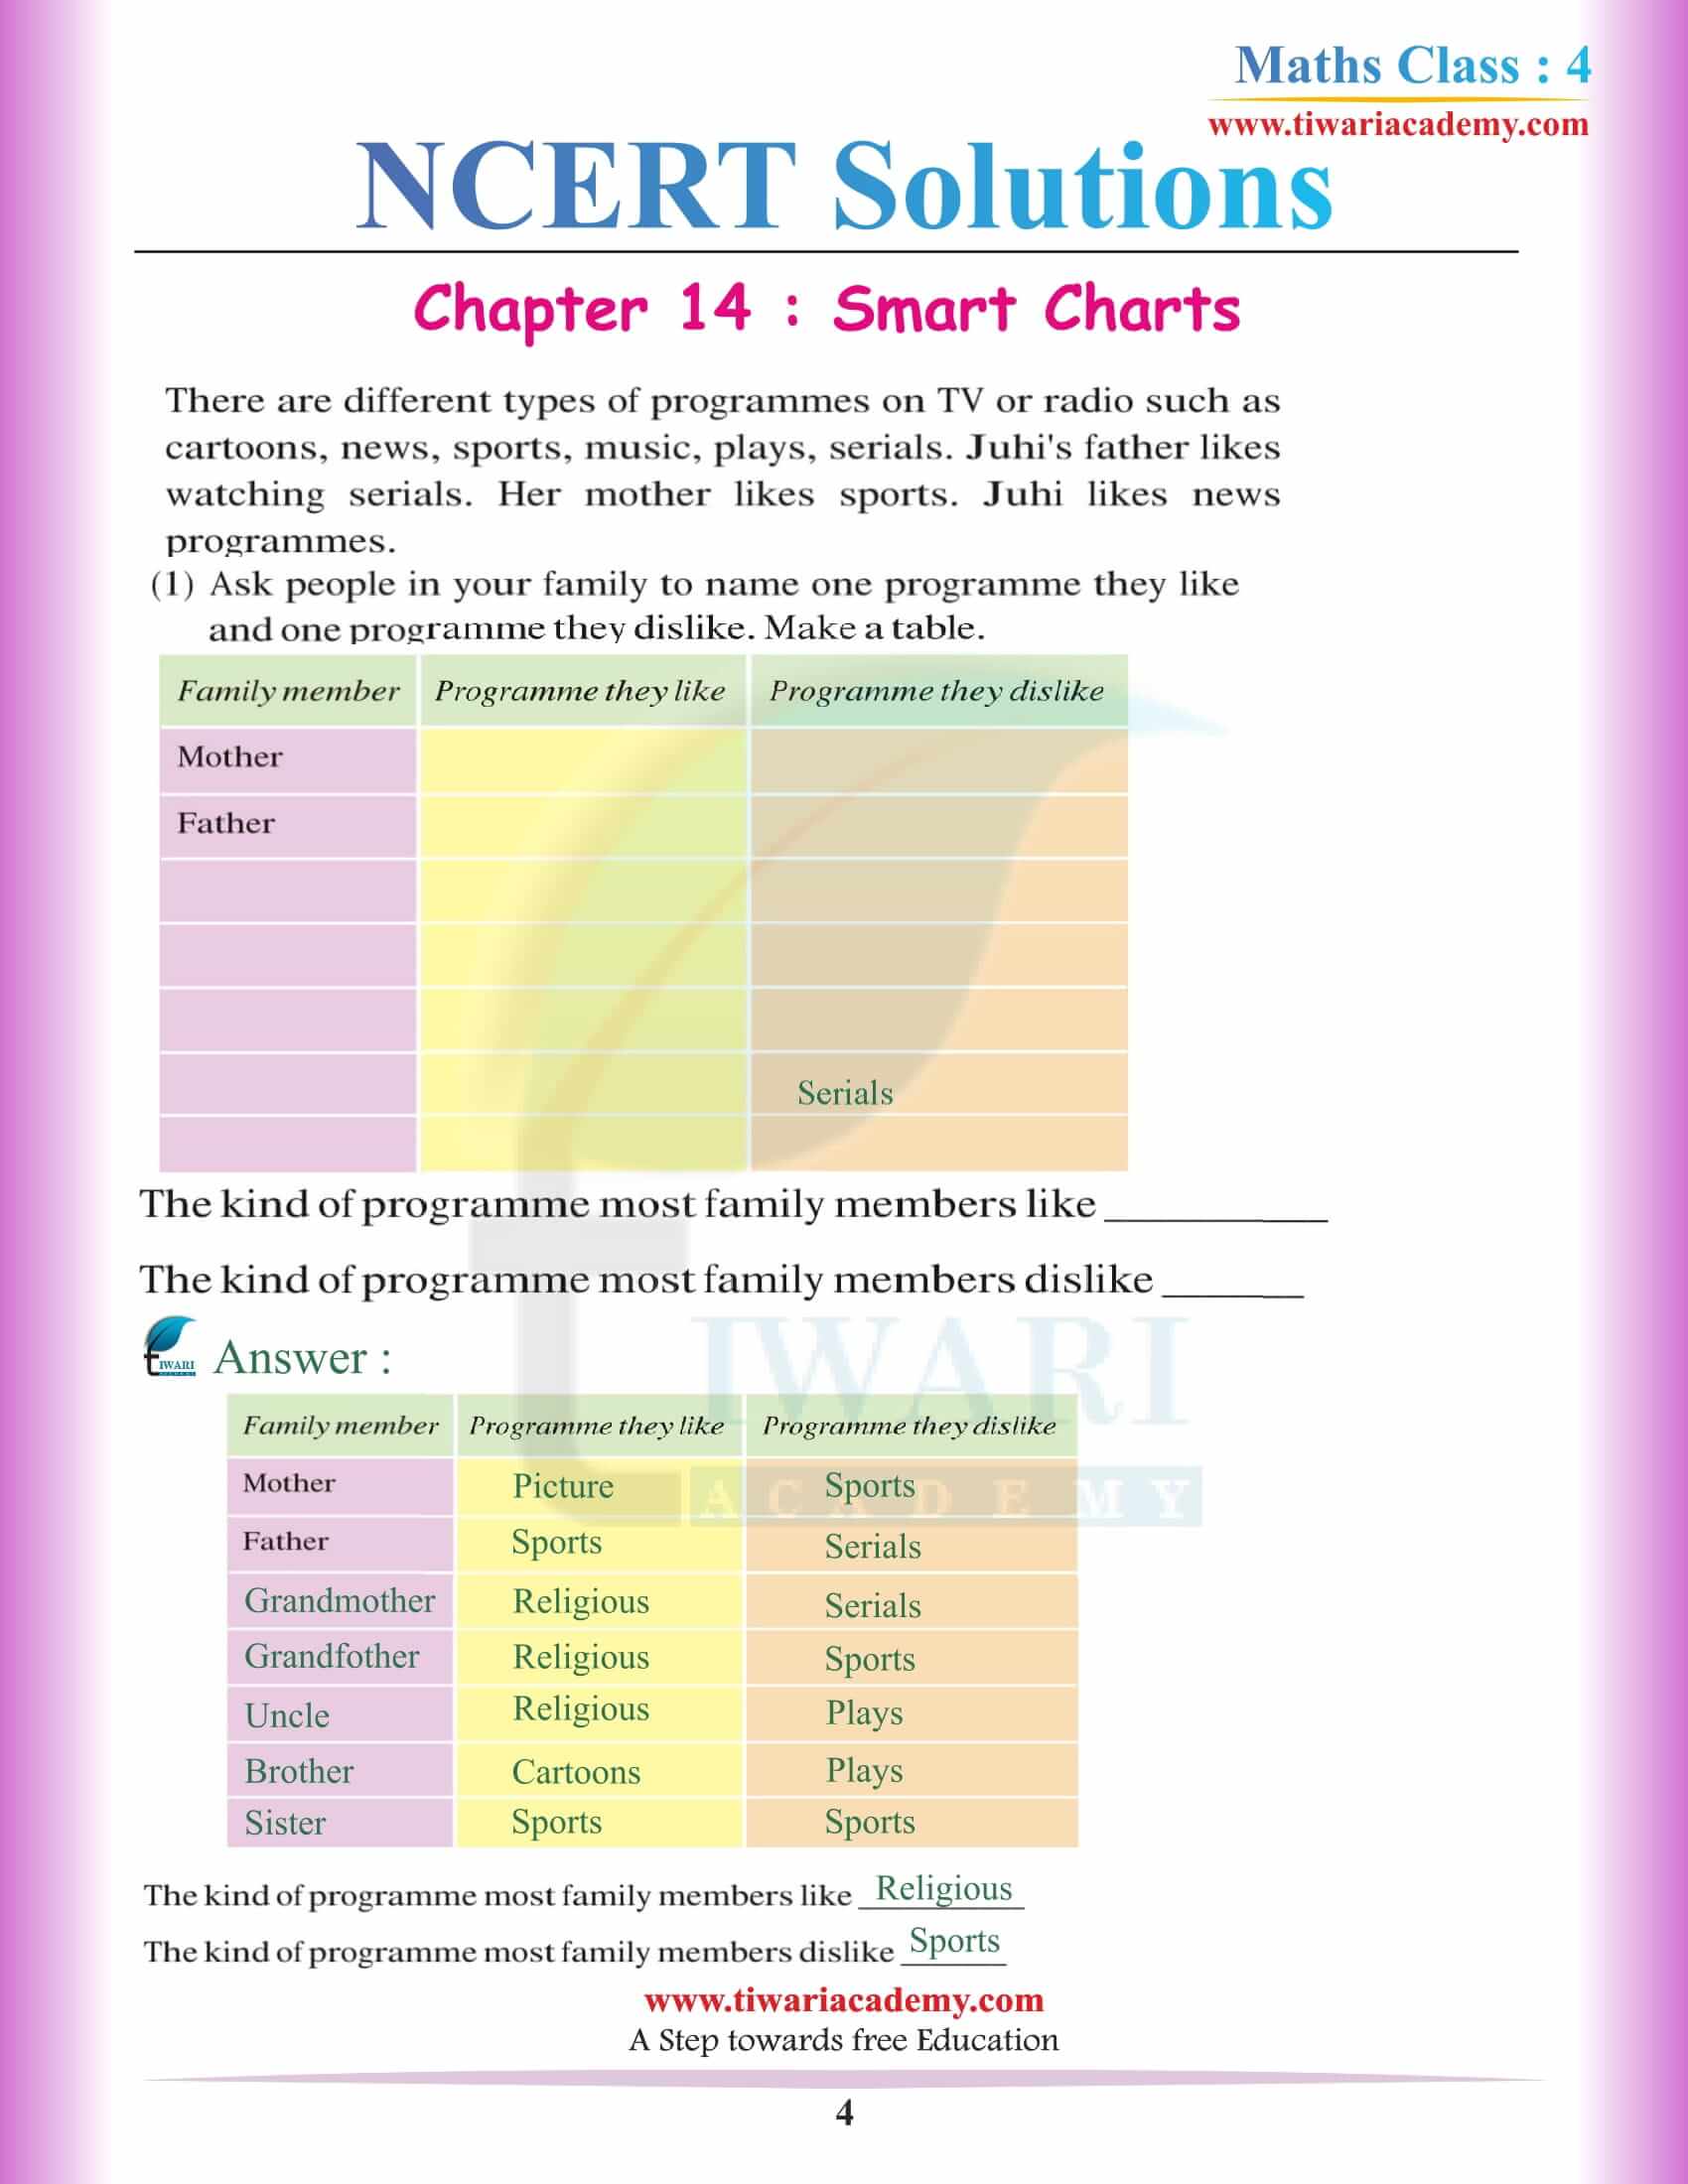 NCERT Solutions for Class 4 Maths Chapter 14 in English medium